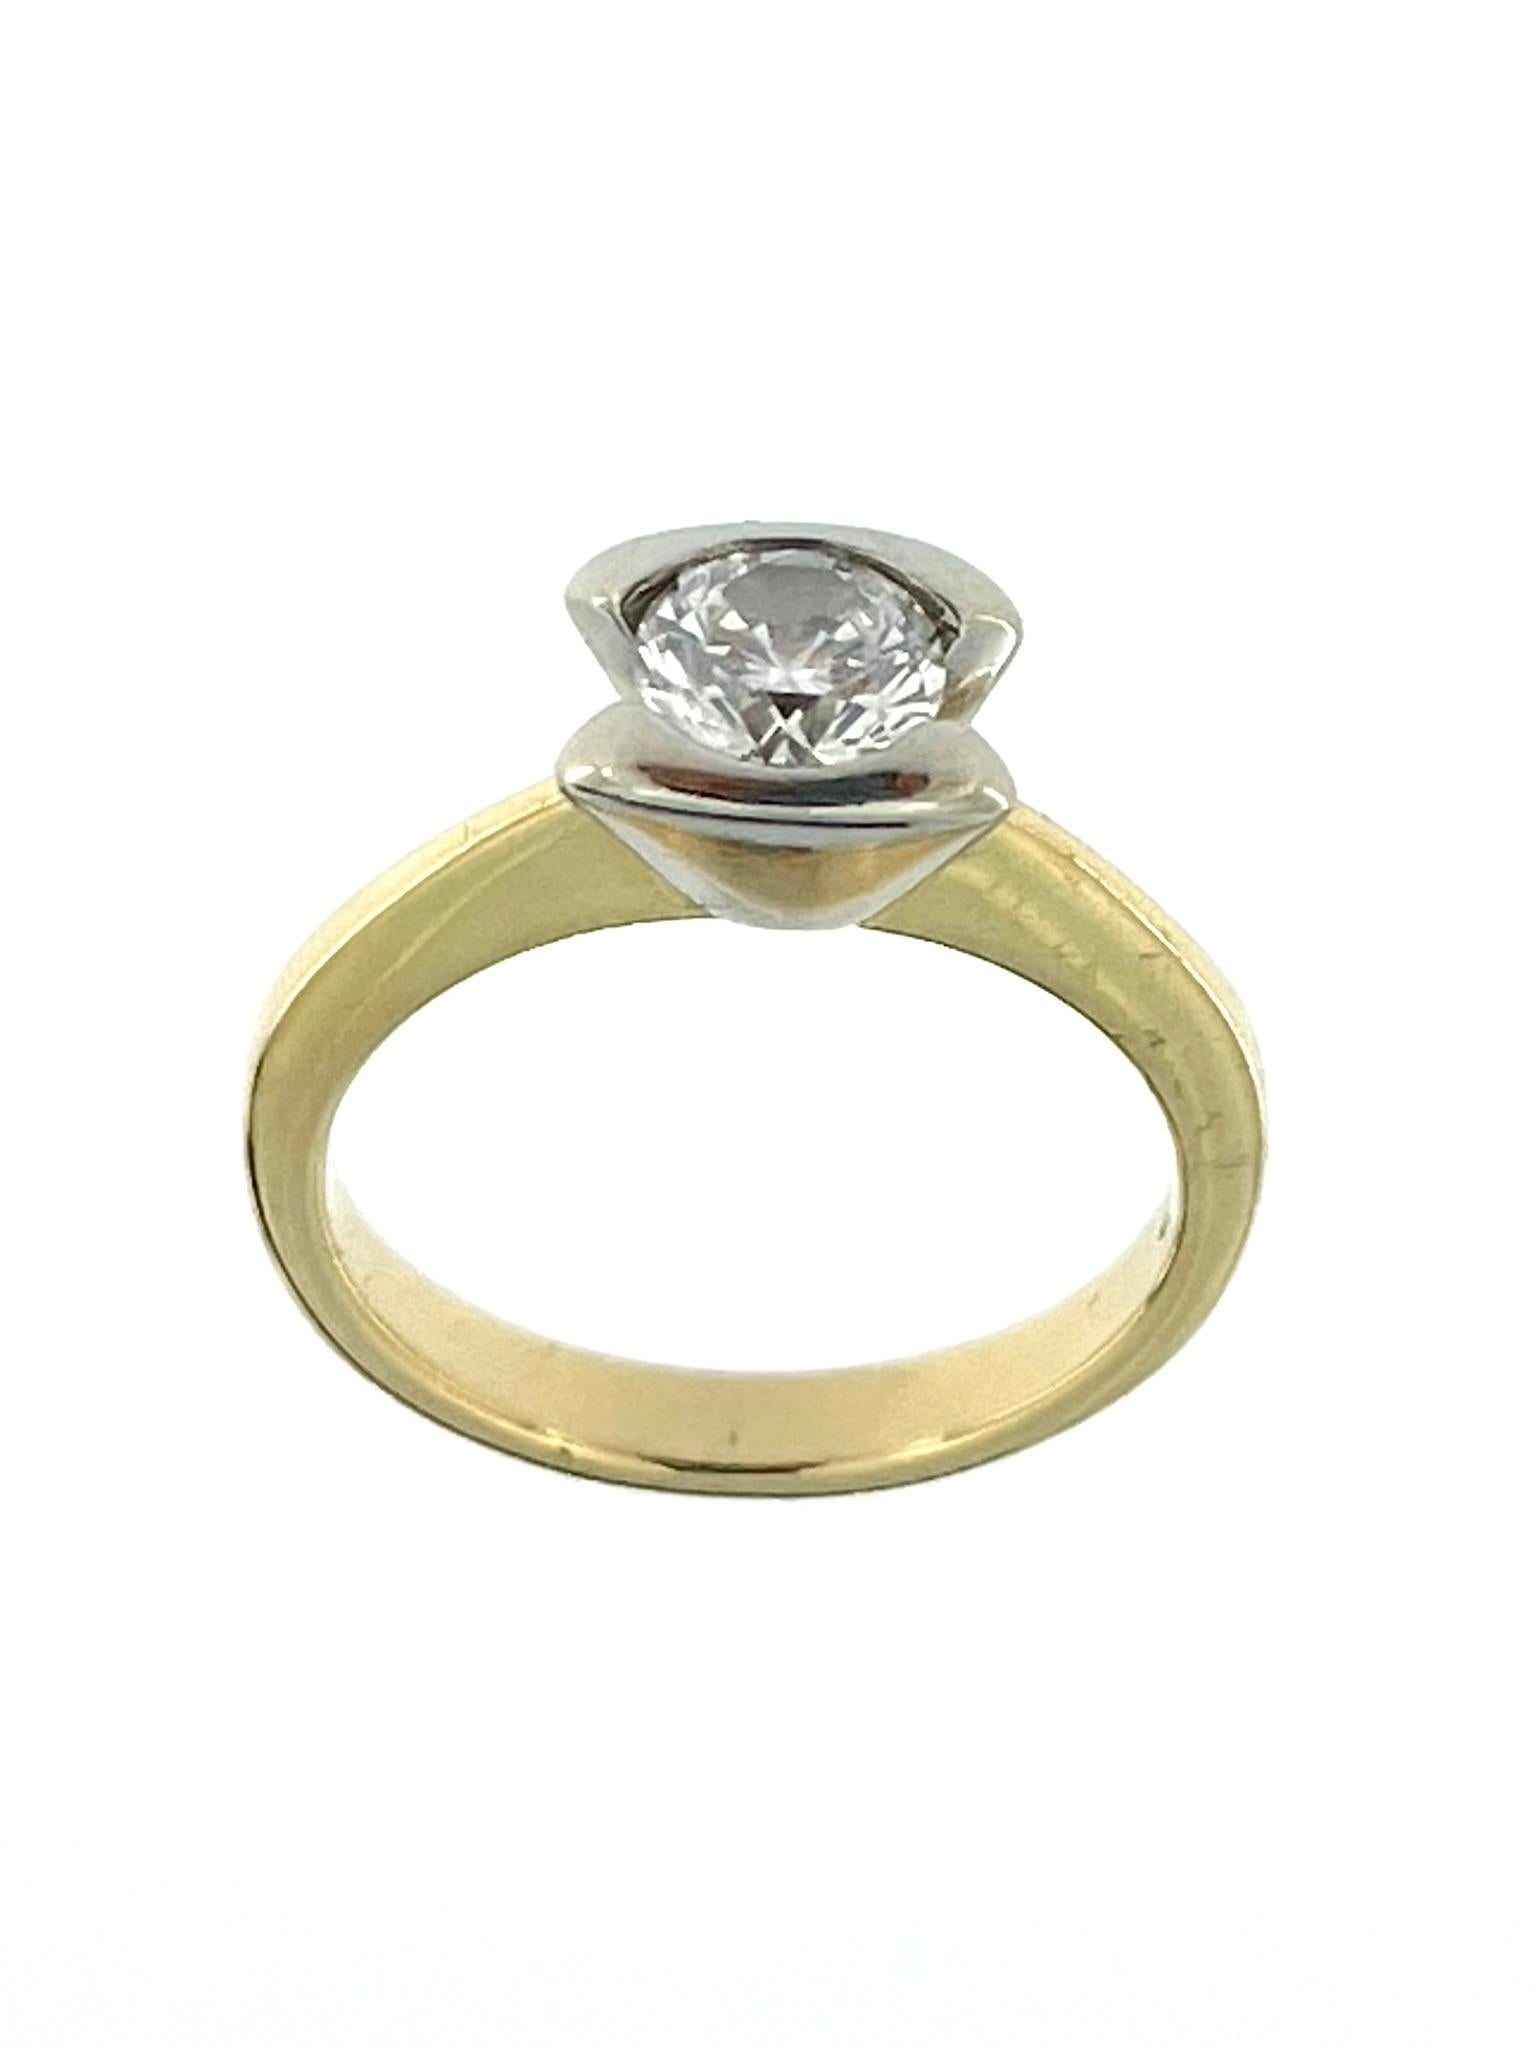 The Diamond Solitaire Italian Ring in 18-karat Yellow and White Gold is a stunning and distinctive piece that combines the warmth of yellow gold with the contemporary allure of white gold. This ring features a single, captivating diamond as the